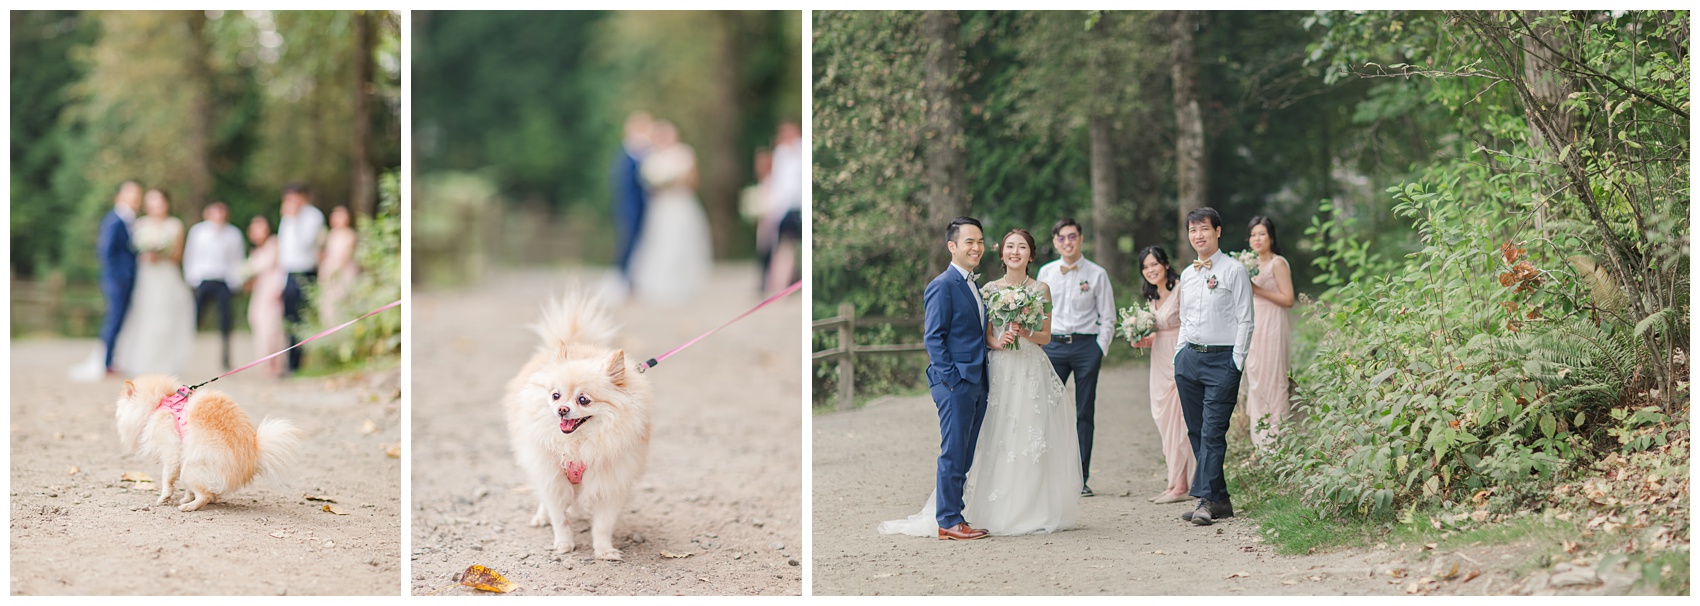 Lafarge Lake Wedding Bridal Party and family group photos, meeting a pedestrian dog 